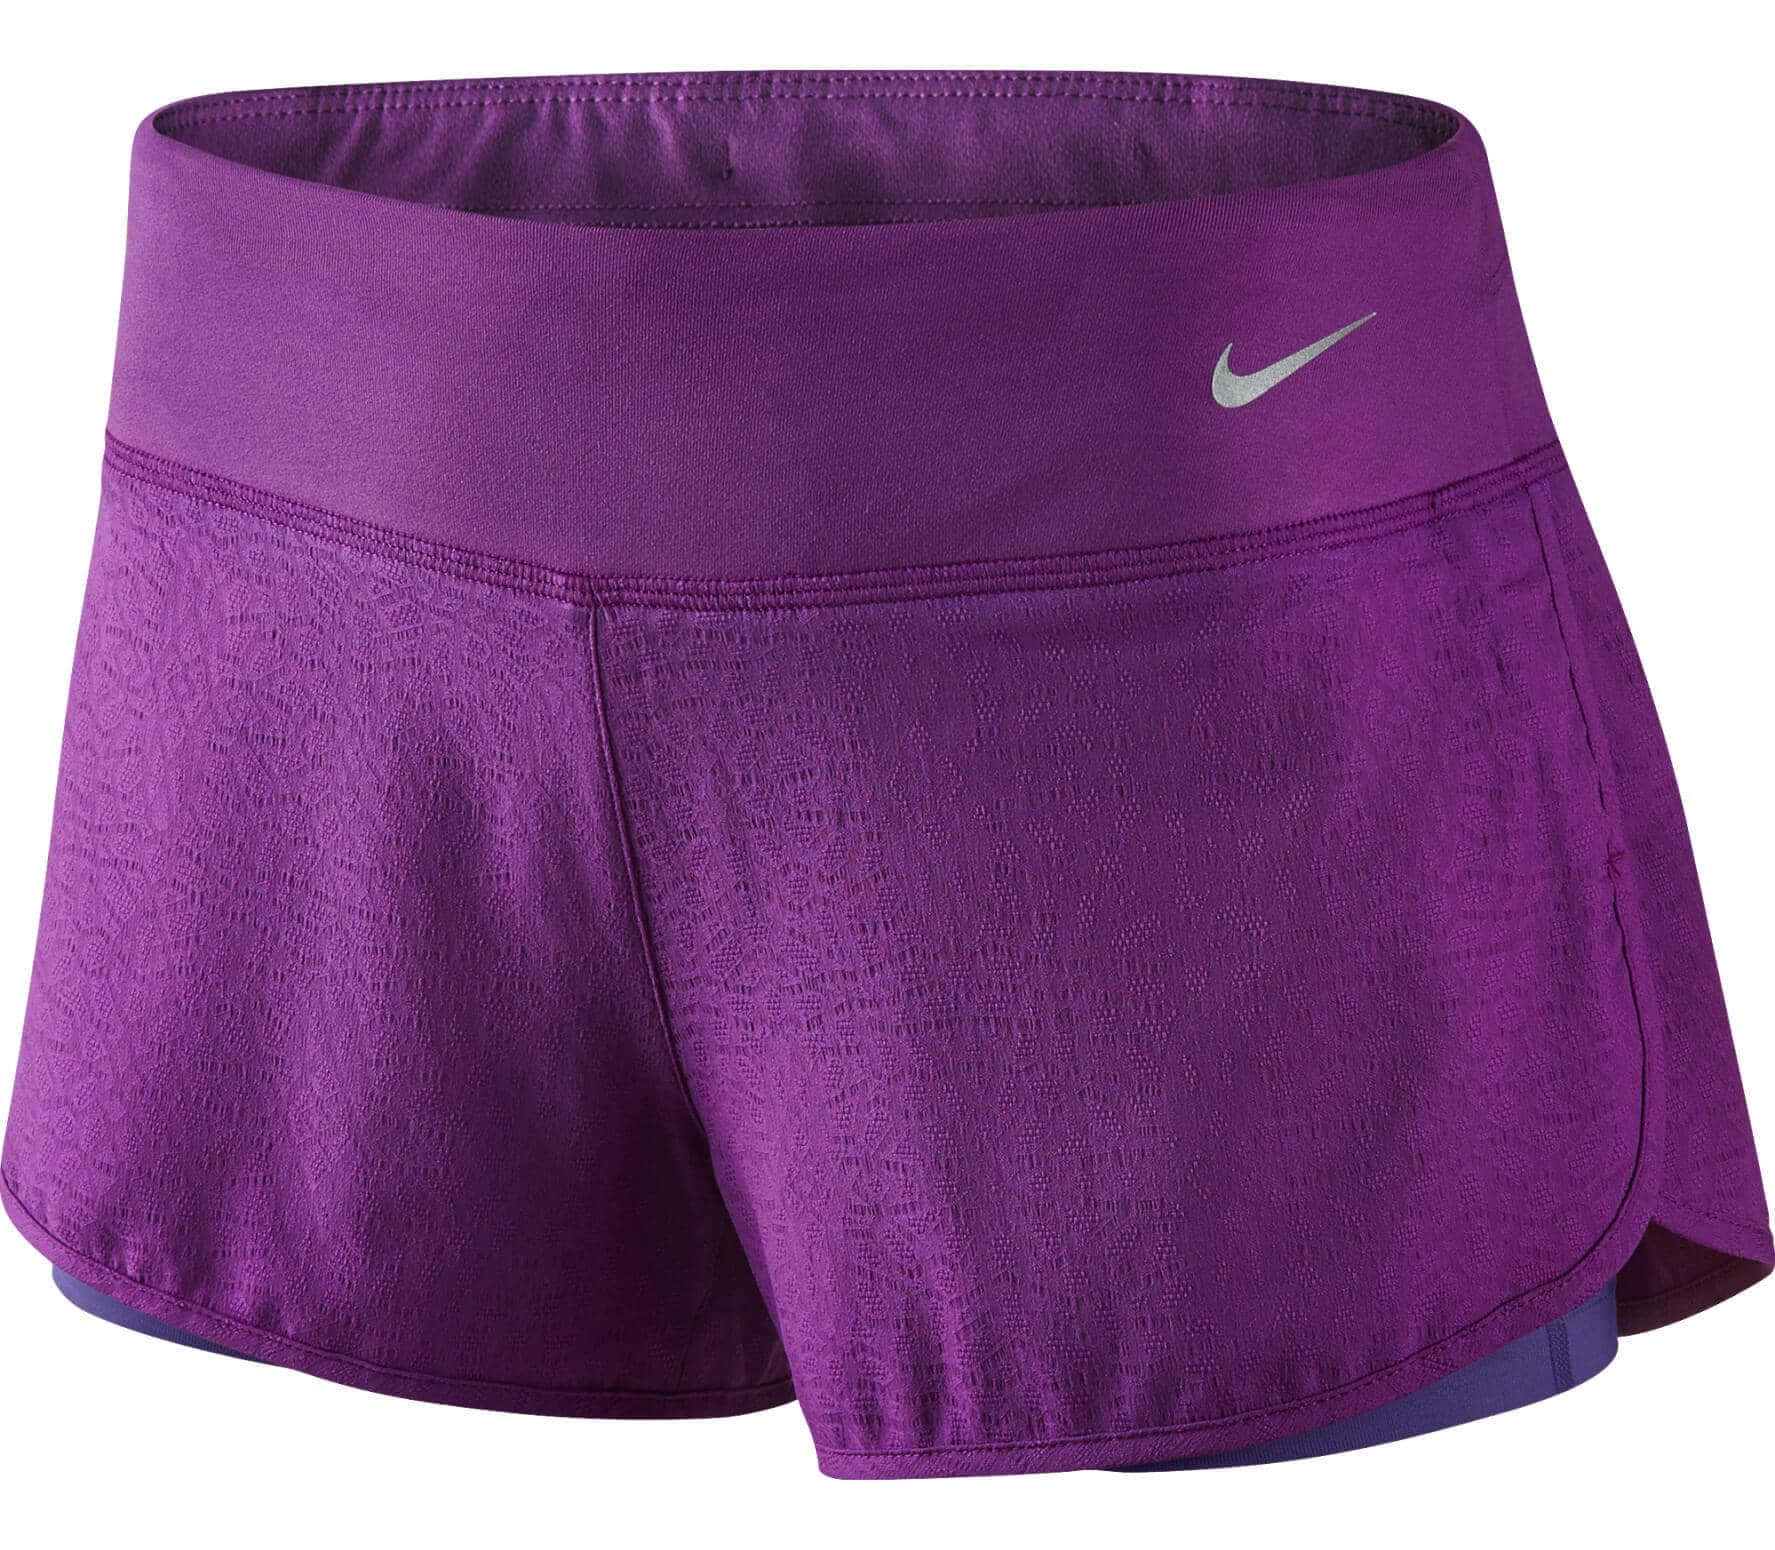 Look cool with a pair of Women's Purple Shorts Wallpaper